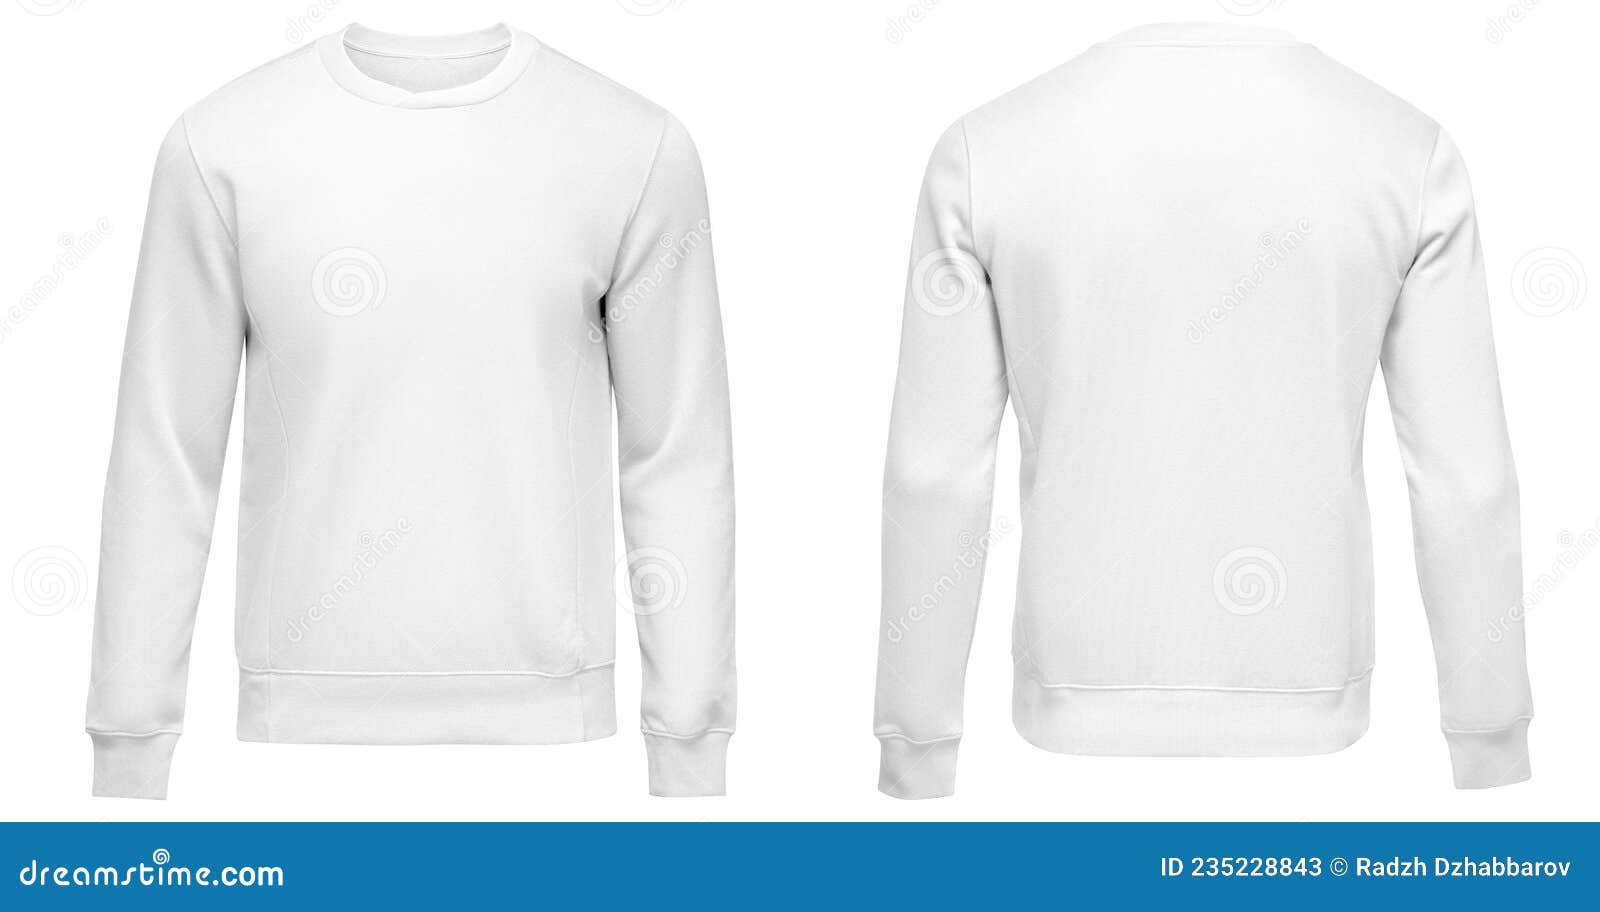 White Sweatshirt Template. Pullover Blank with Long Sleeve, Mockup for ...